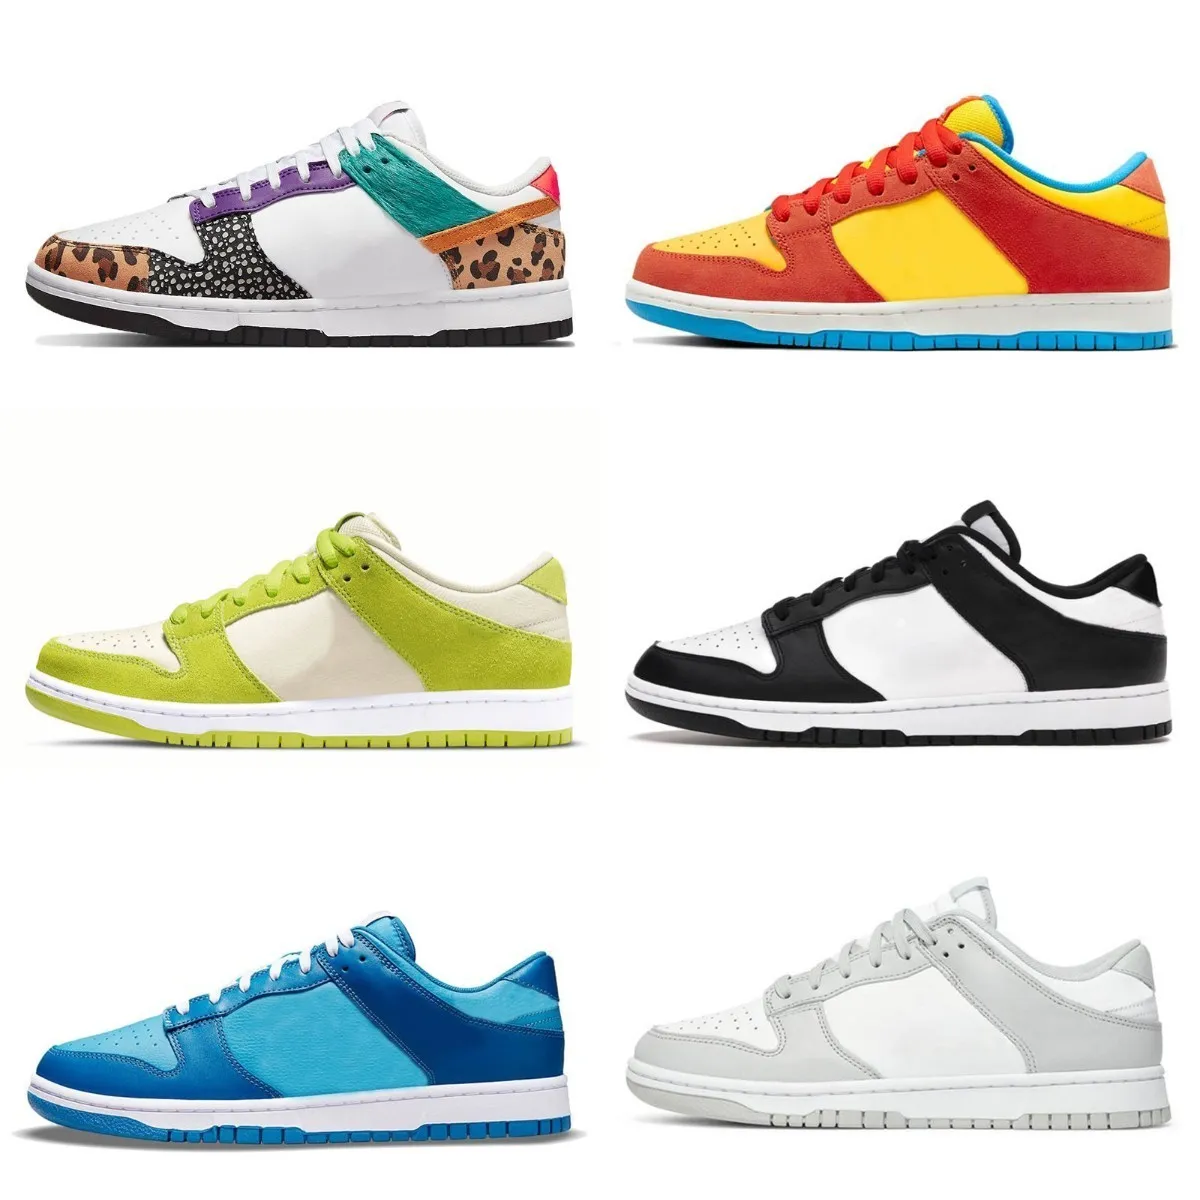 Diseñadores SB Casual Sports Shoes Safari Mix Dunks Paisley UNC Blue Raspberry Mujeres Hombres Sbdunktrainers Union Low Bart Simpson Green Barber Shop Cherry Sneakers